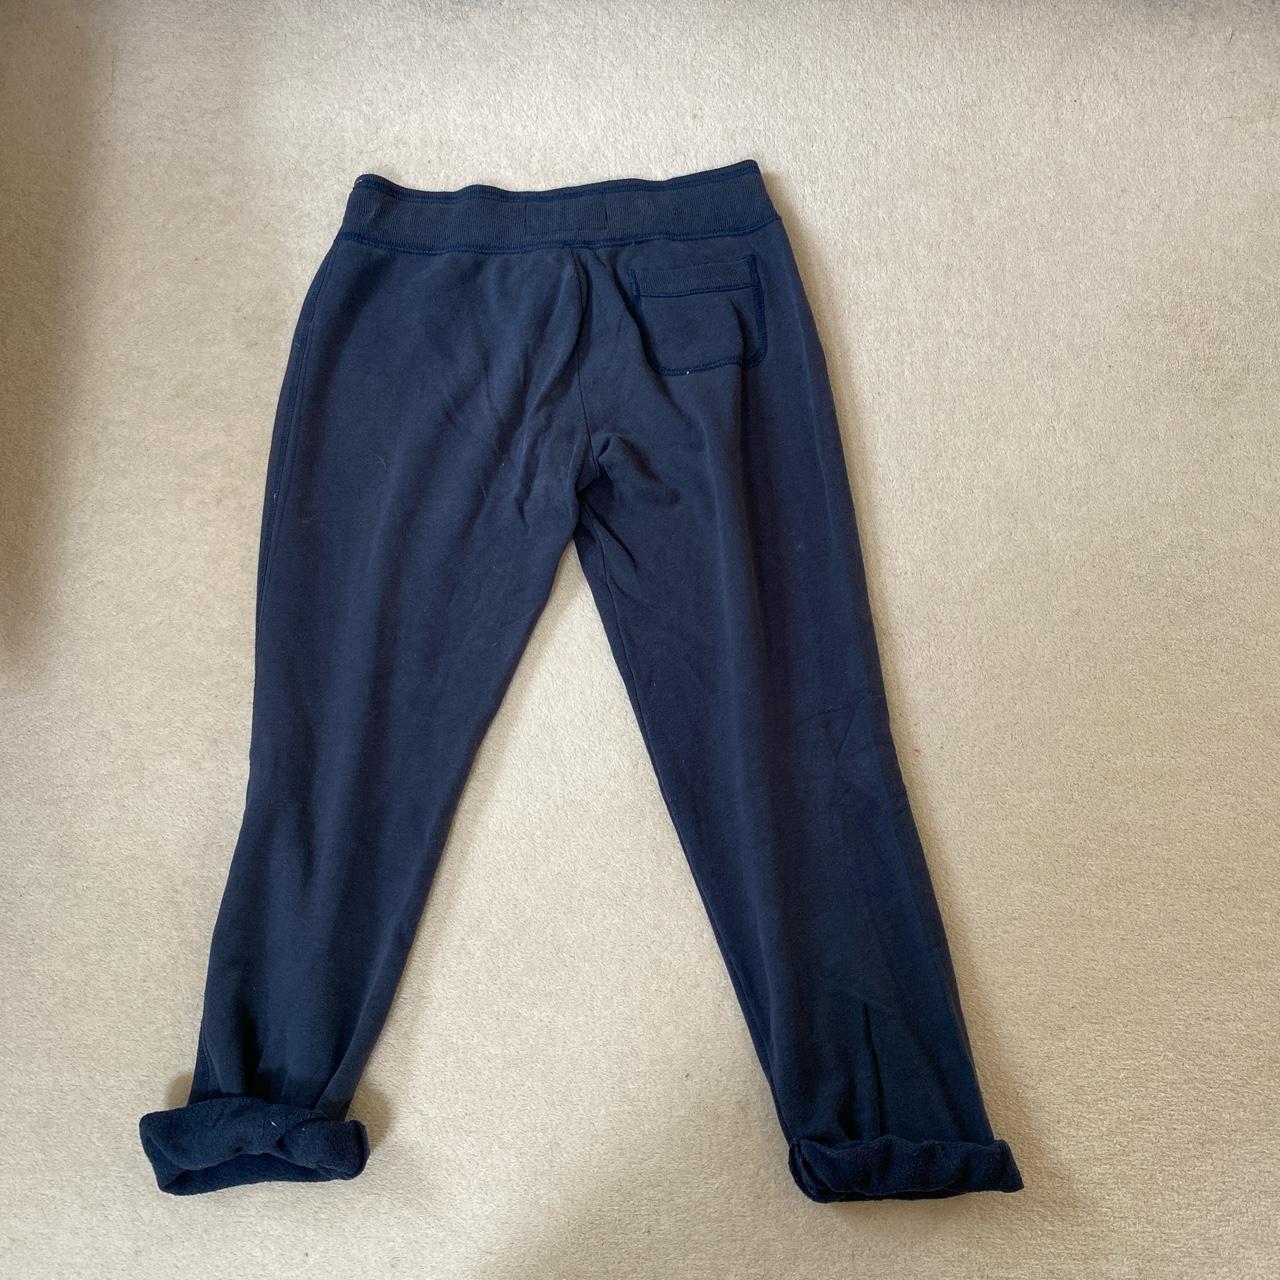 Abercrombie & Fitch late 00s tracksuit bottoms with... - Depop